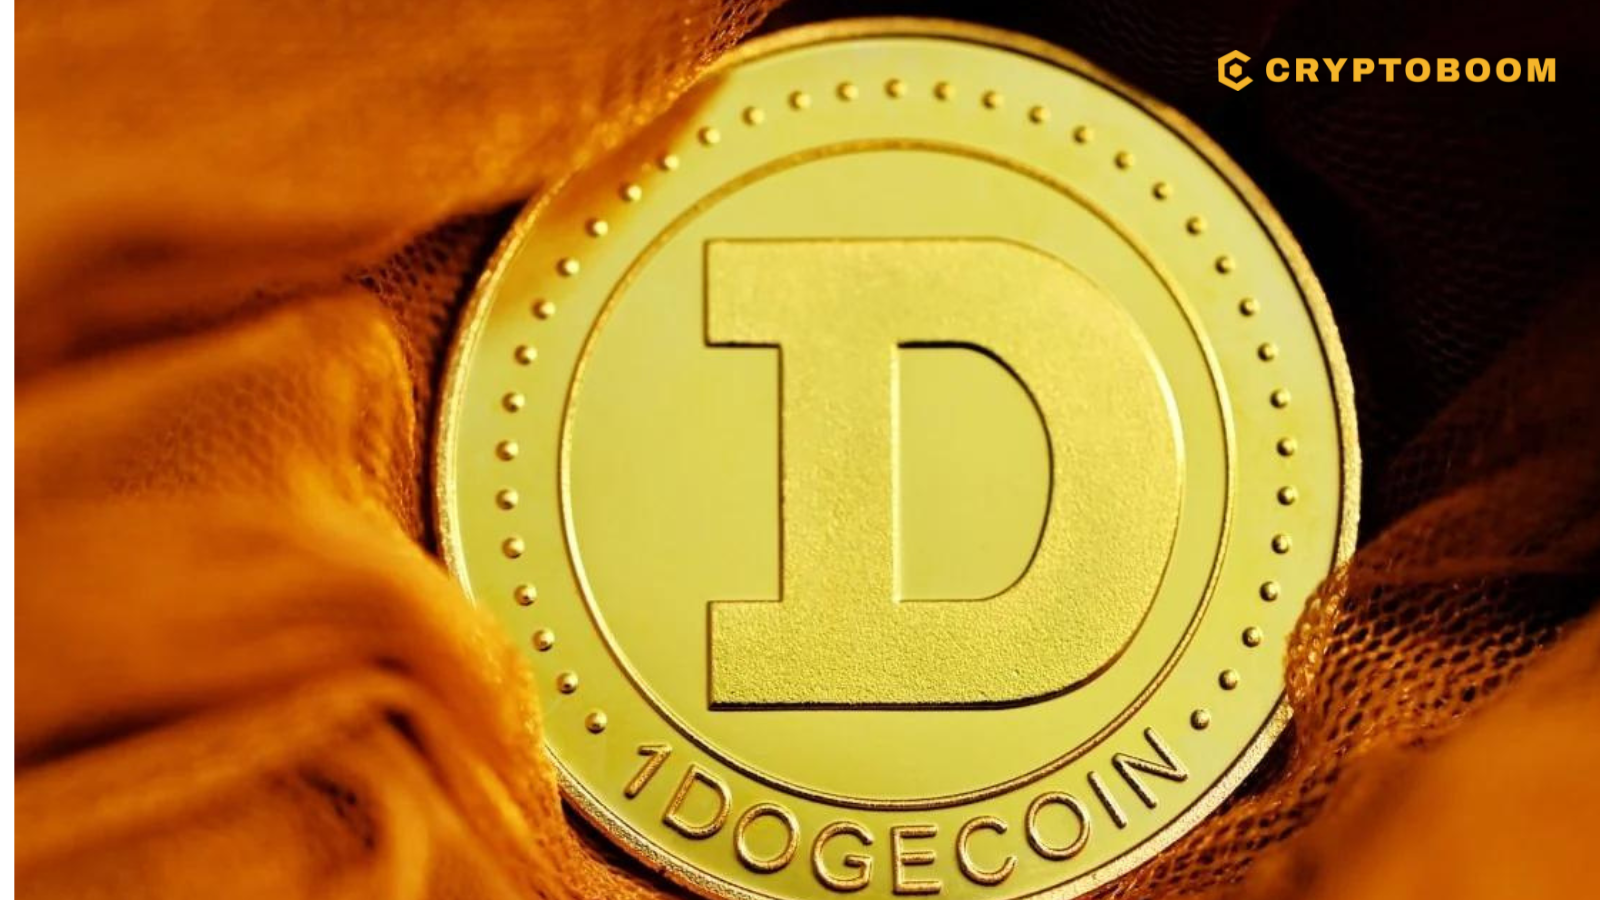 https://cryptoboom.com/dogecoins-journey-to-0-20-a-tale-of-ups-and-downs/